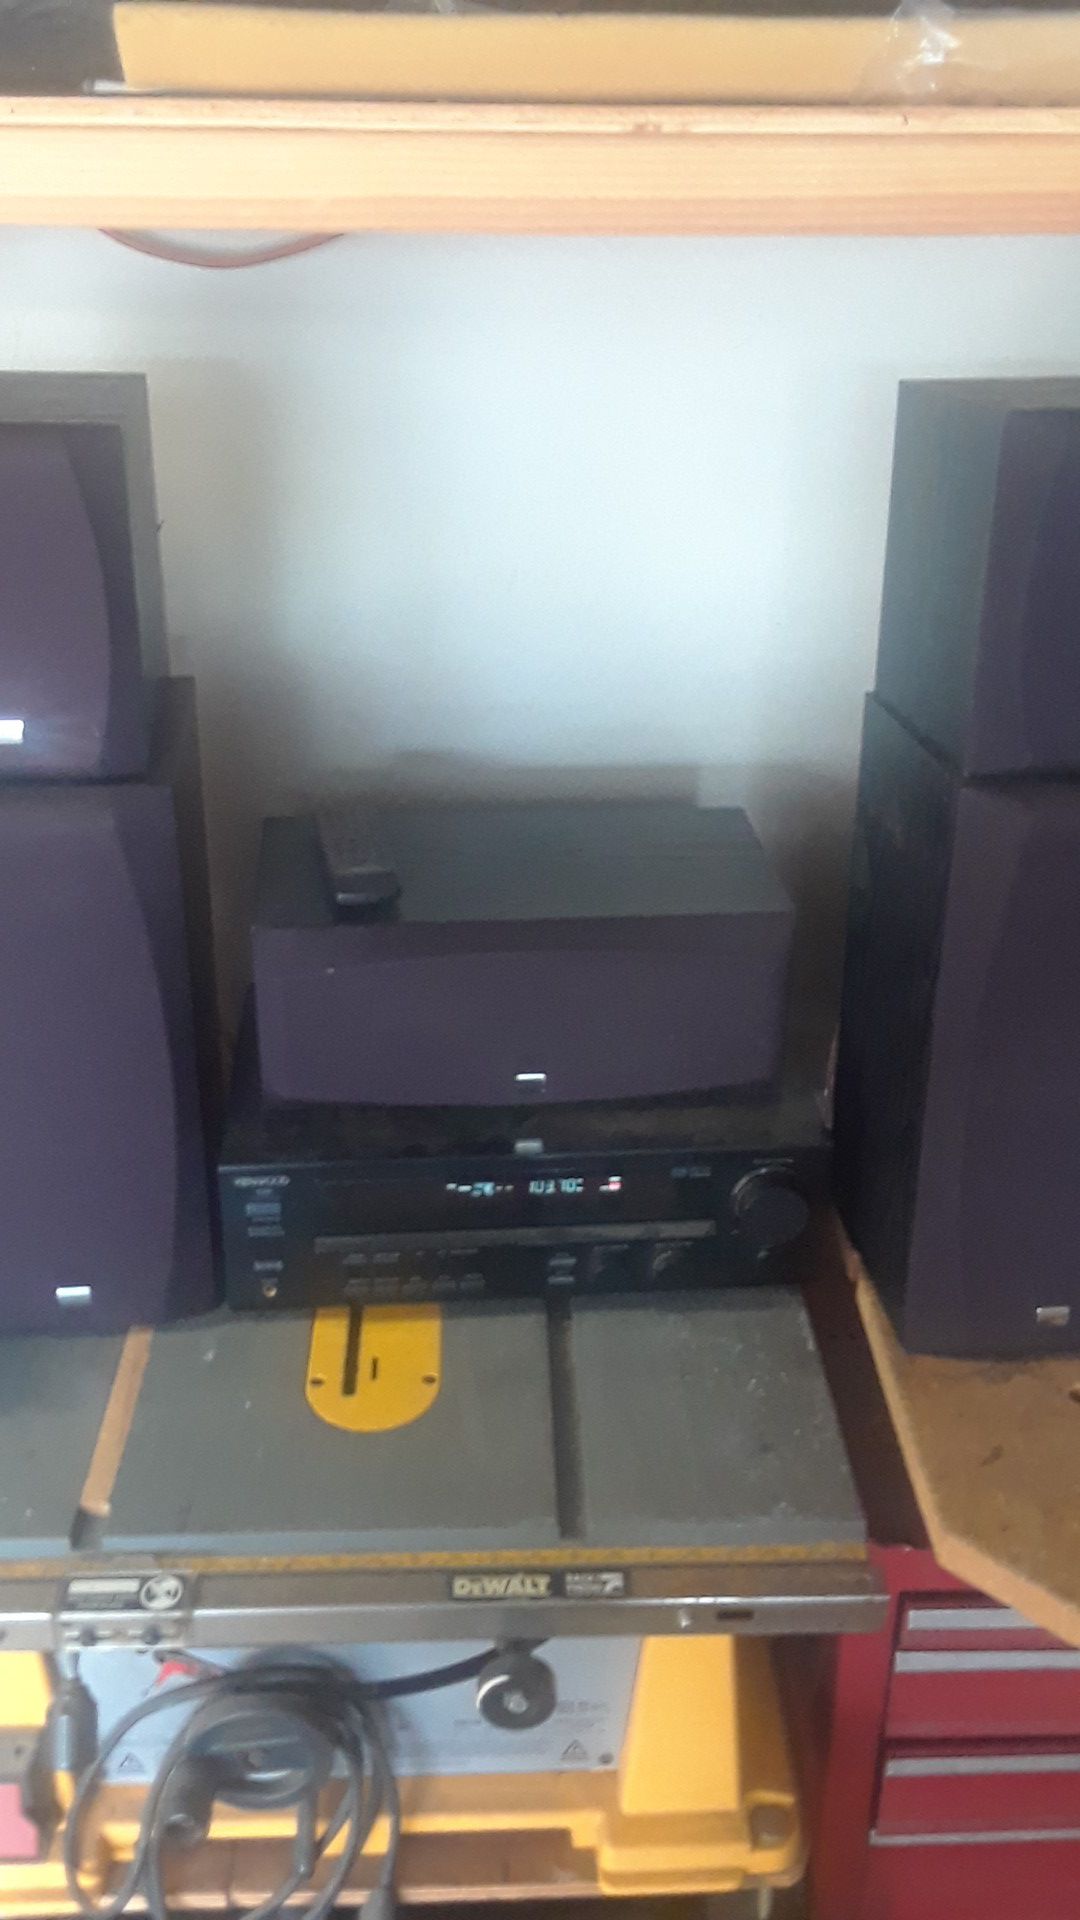 Stereo system with speakers